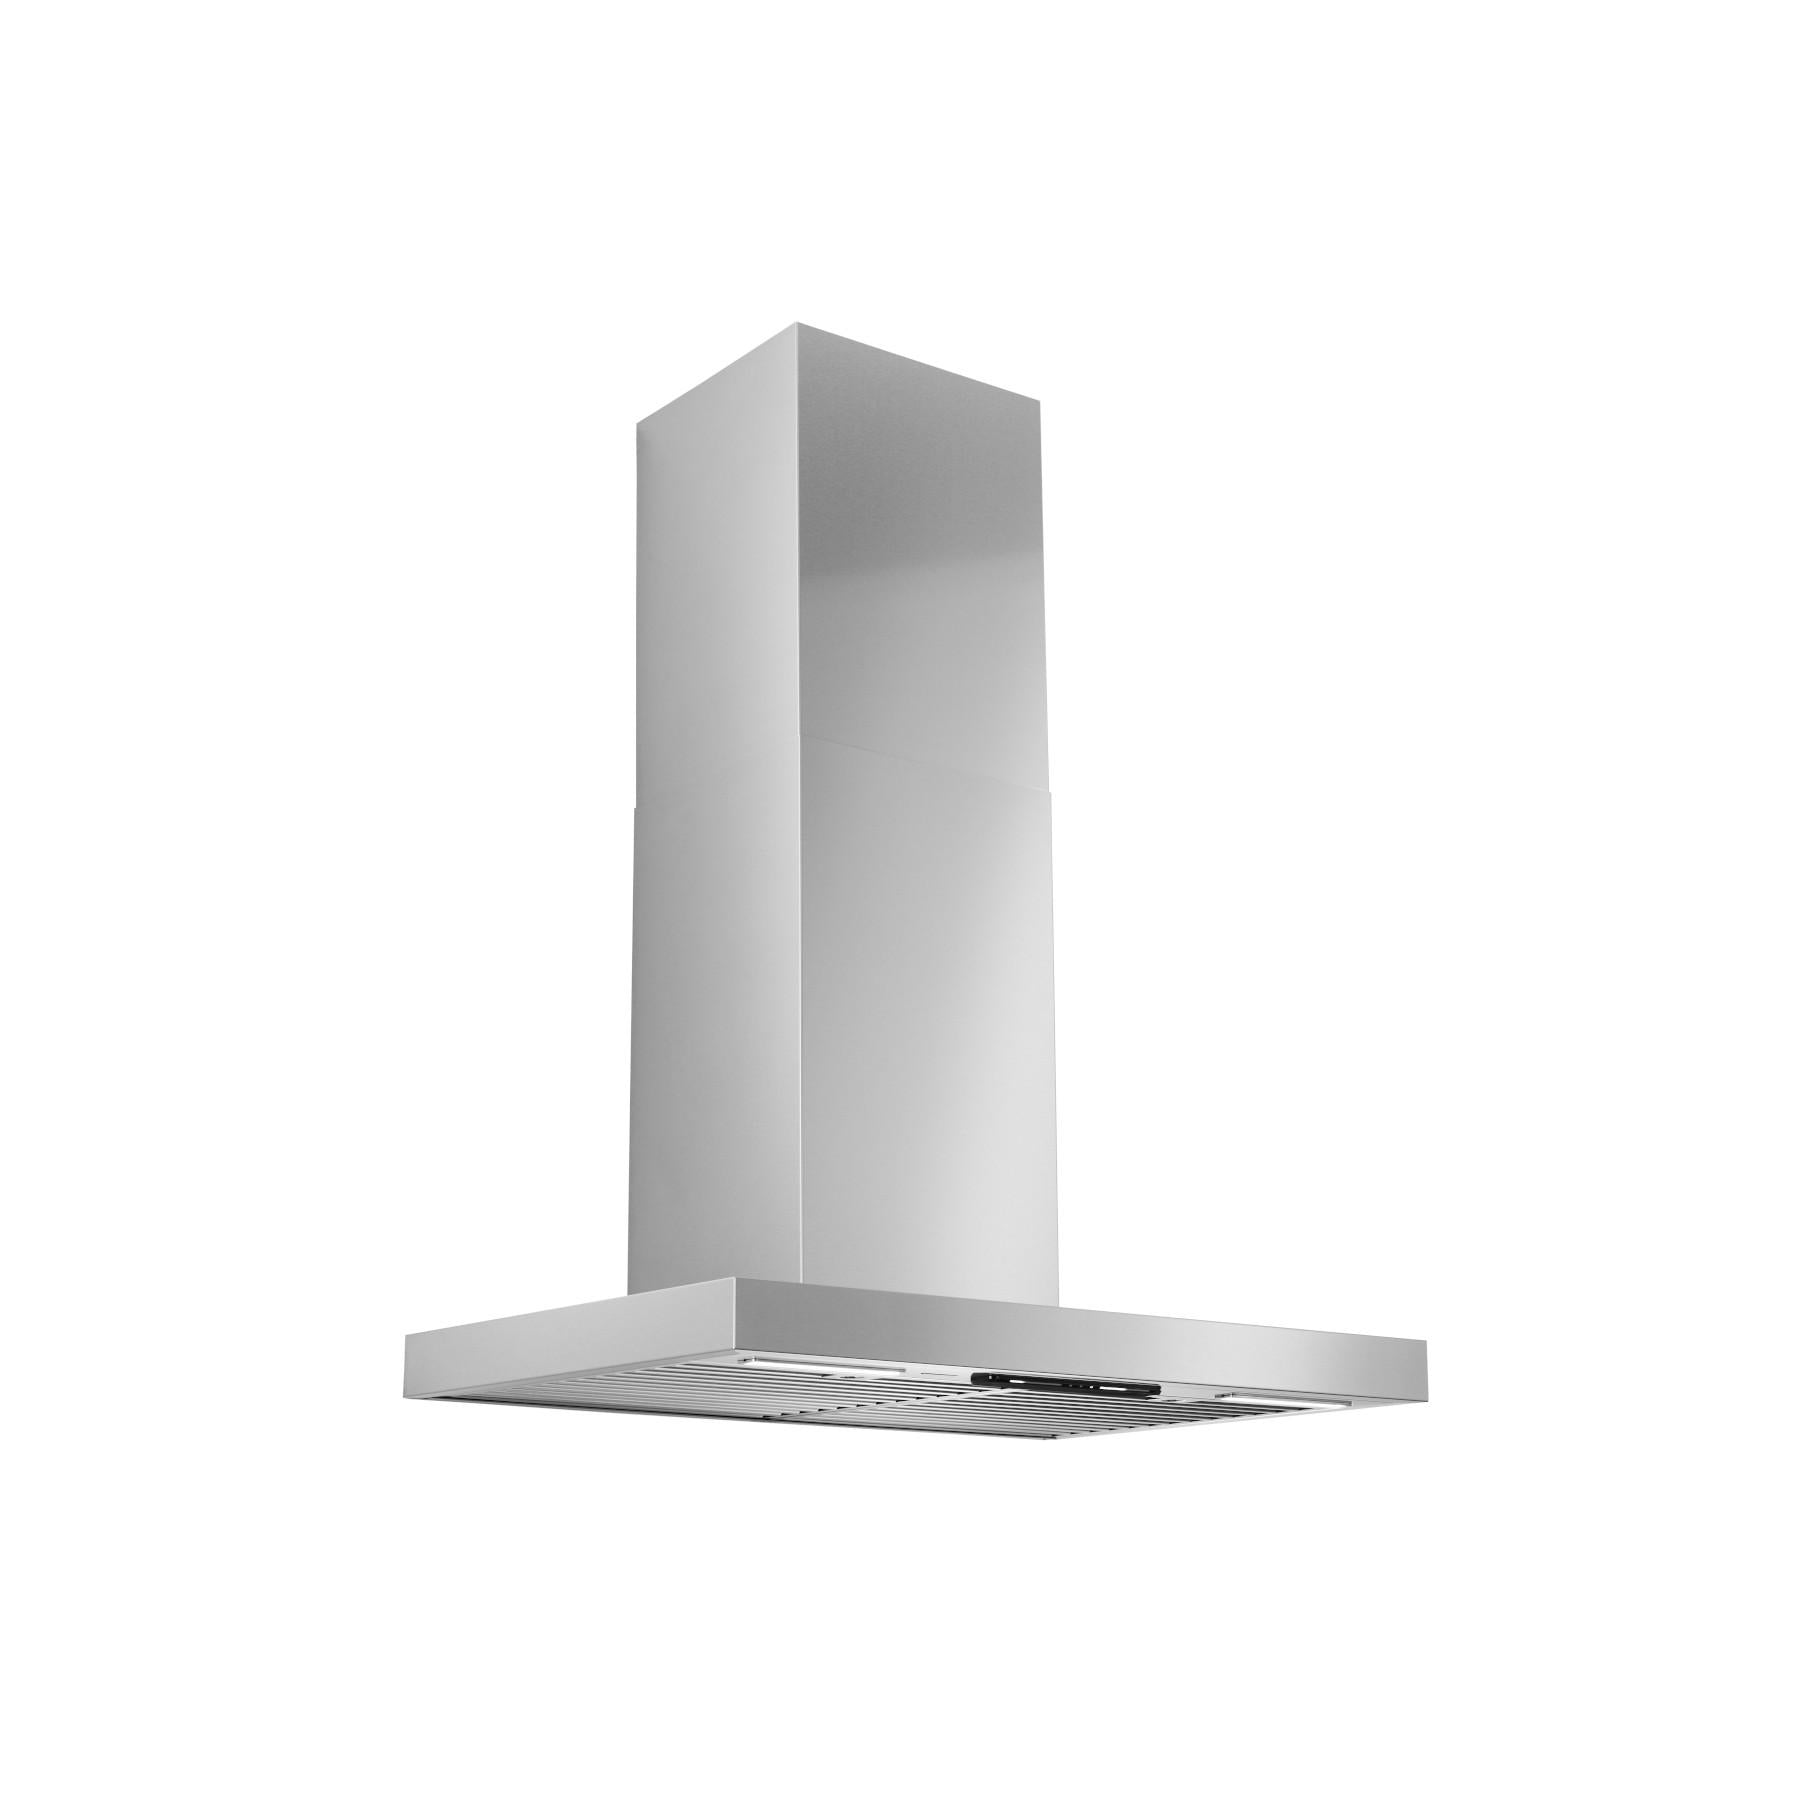 Best Range Hoods WCT1366SS 36-Inch Wall Mount Chimney Hood W/ Smartsense® And Voice Control, 650 Max Blower Cfm, Stainless Steel (Wct1 Series)